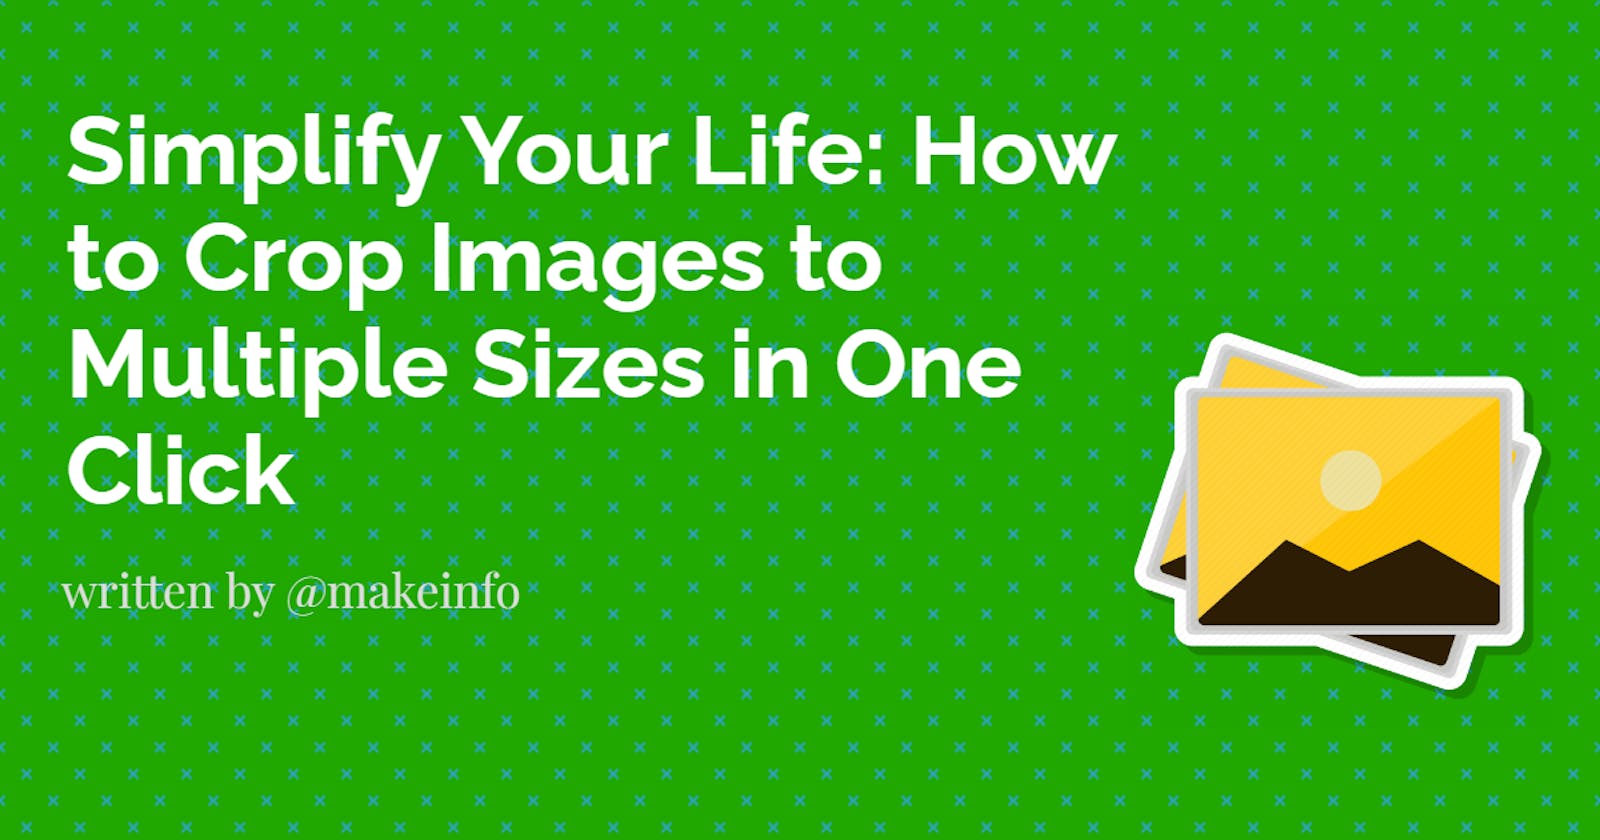 The Magic of Bulk Image Cropping: Why One Size Does Not Fit All